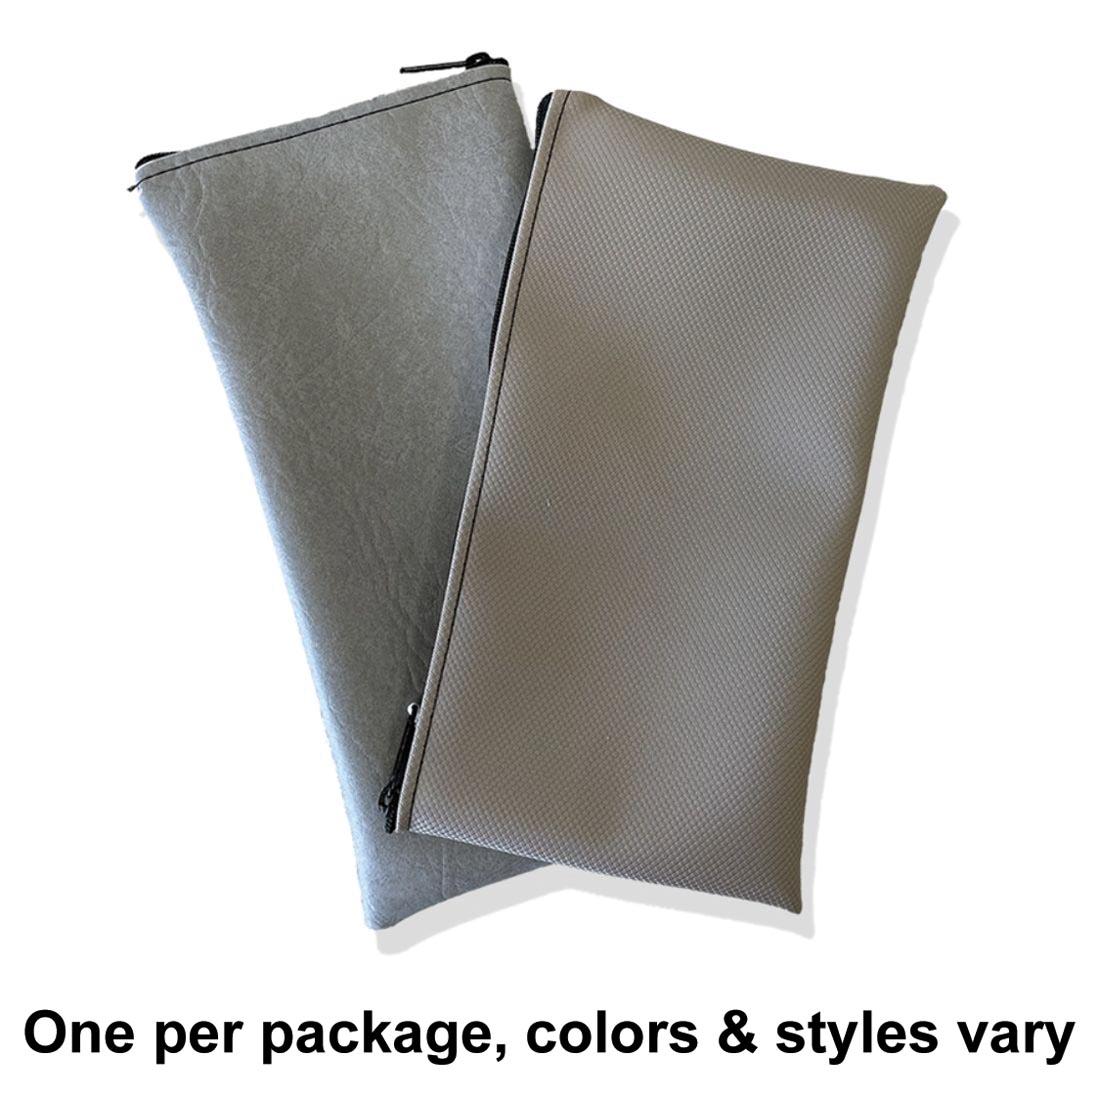 two medium zipper storage bags, with the words "One per package, colors & styles vary"